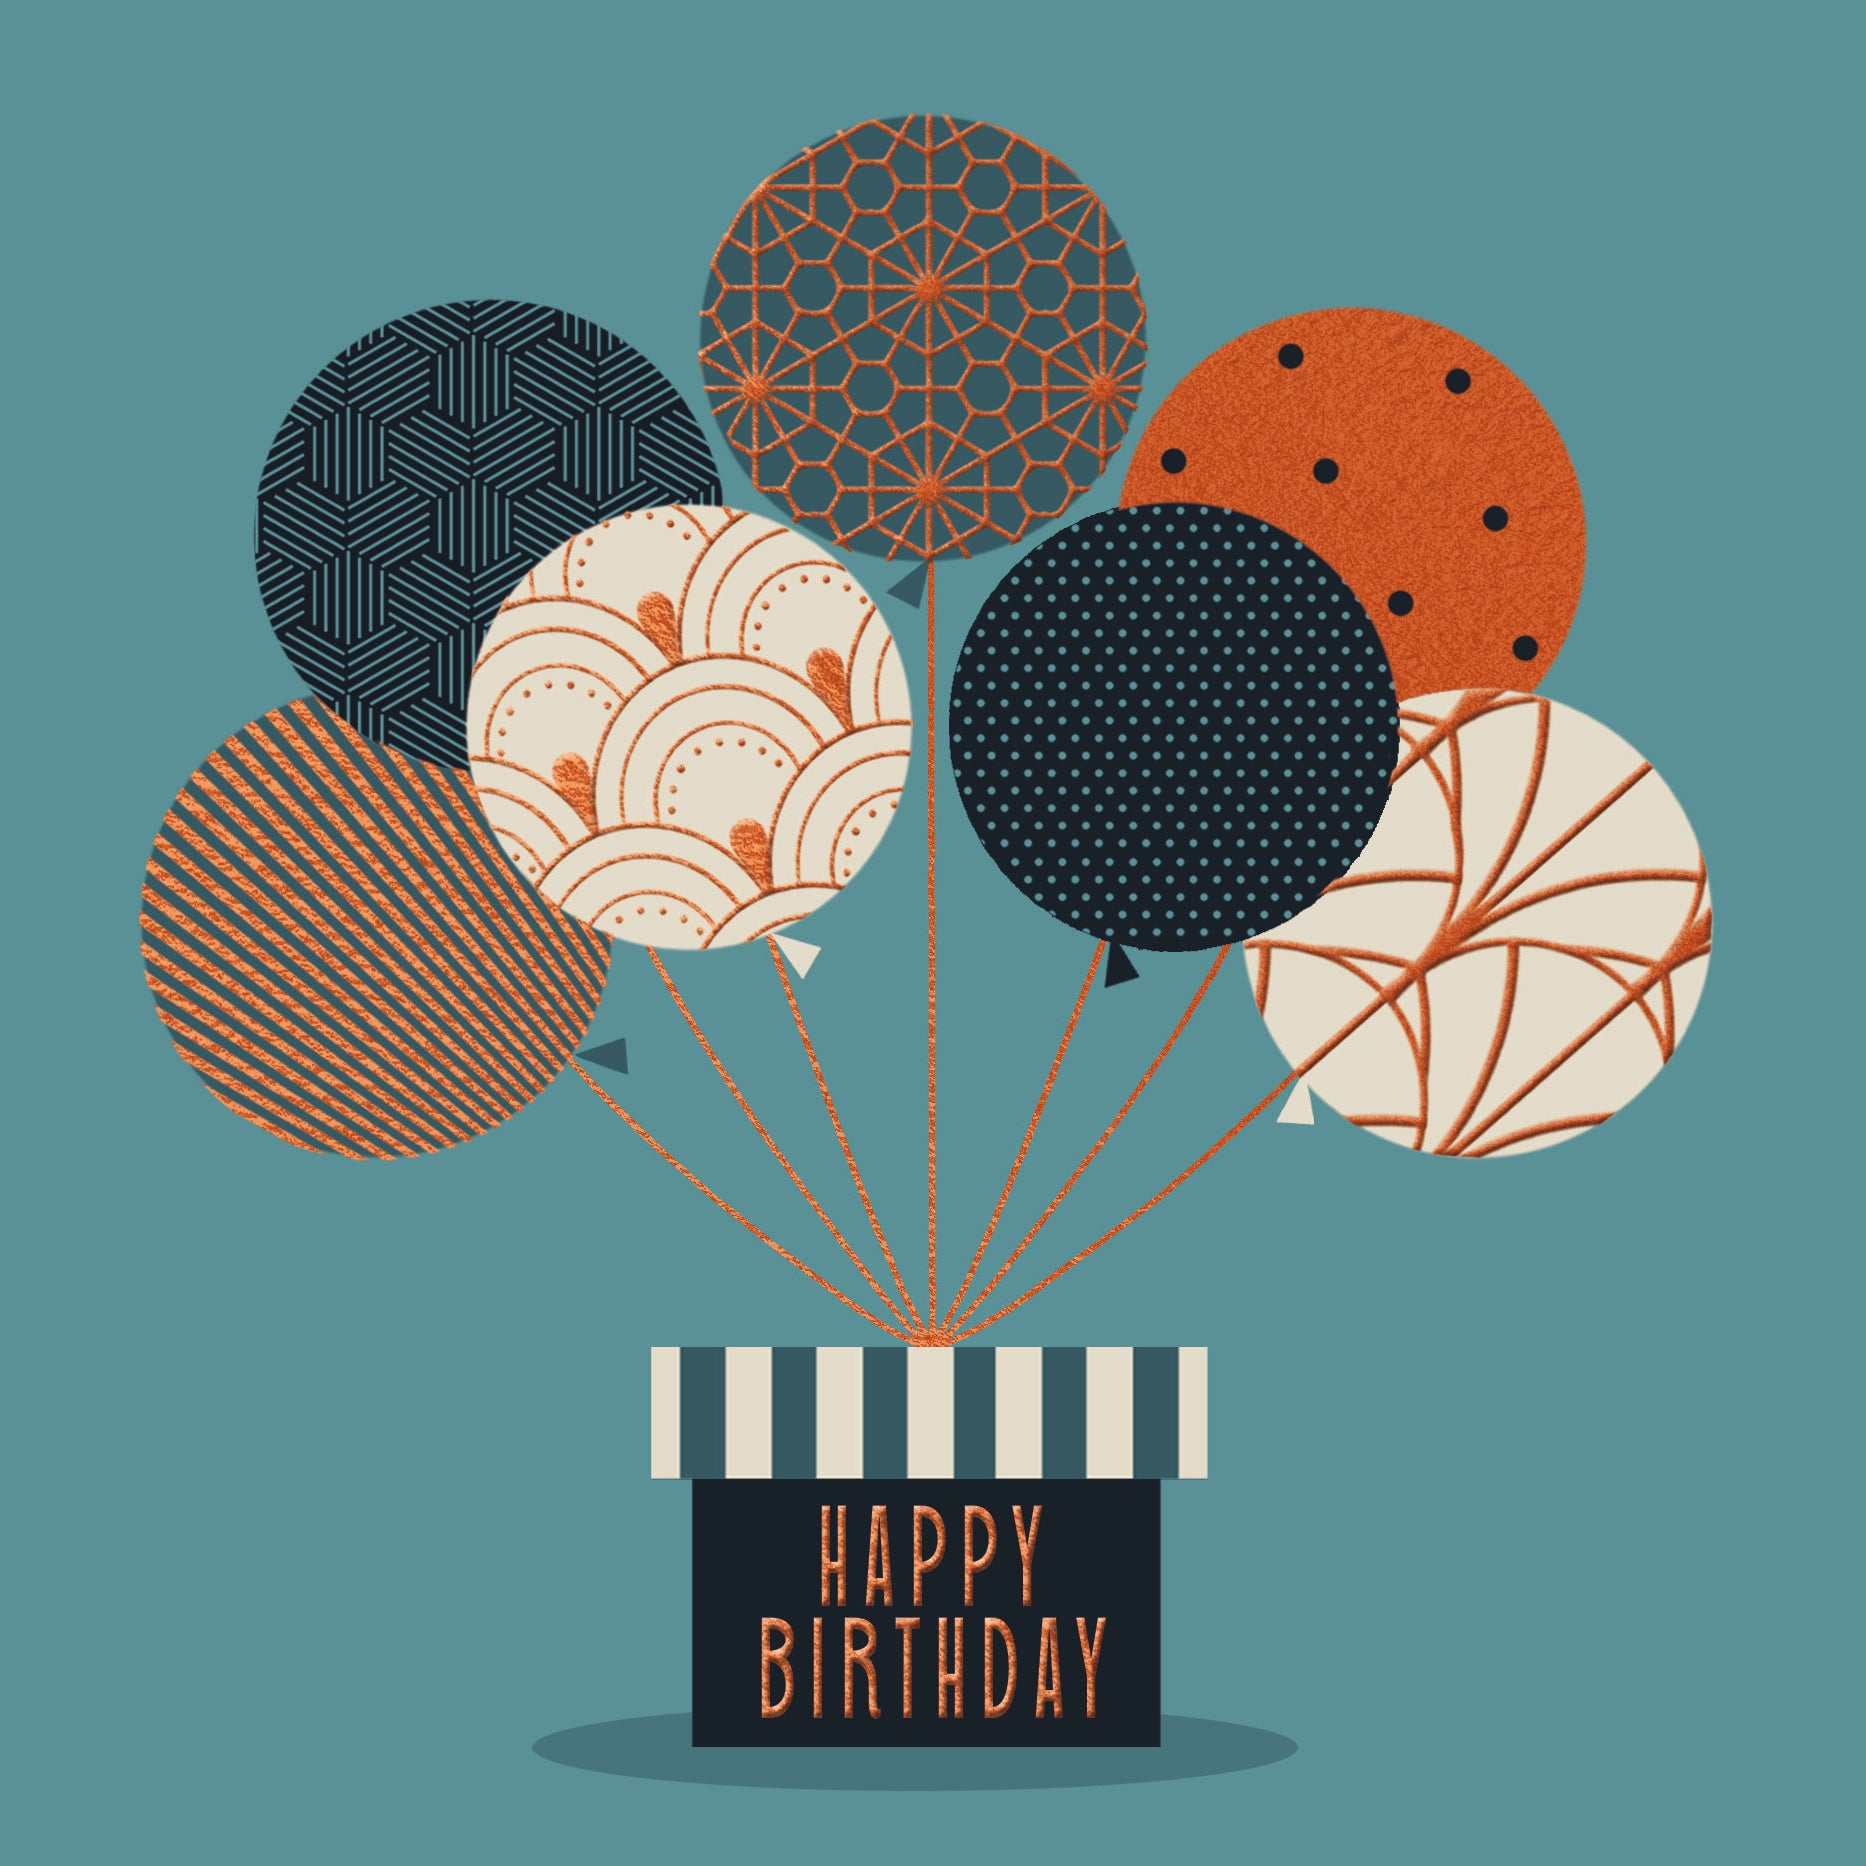 Globe Birthday Balloon Surprise Card from Penny Black